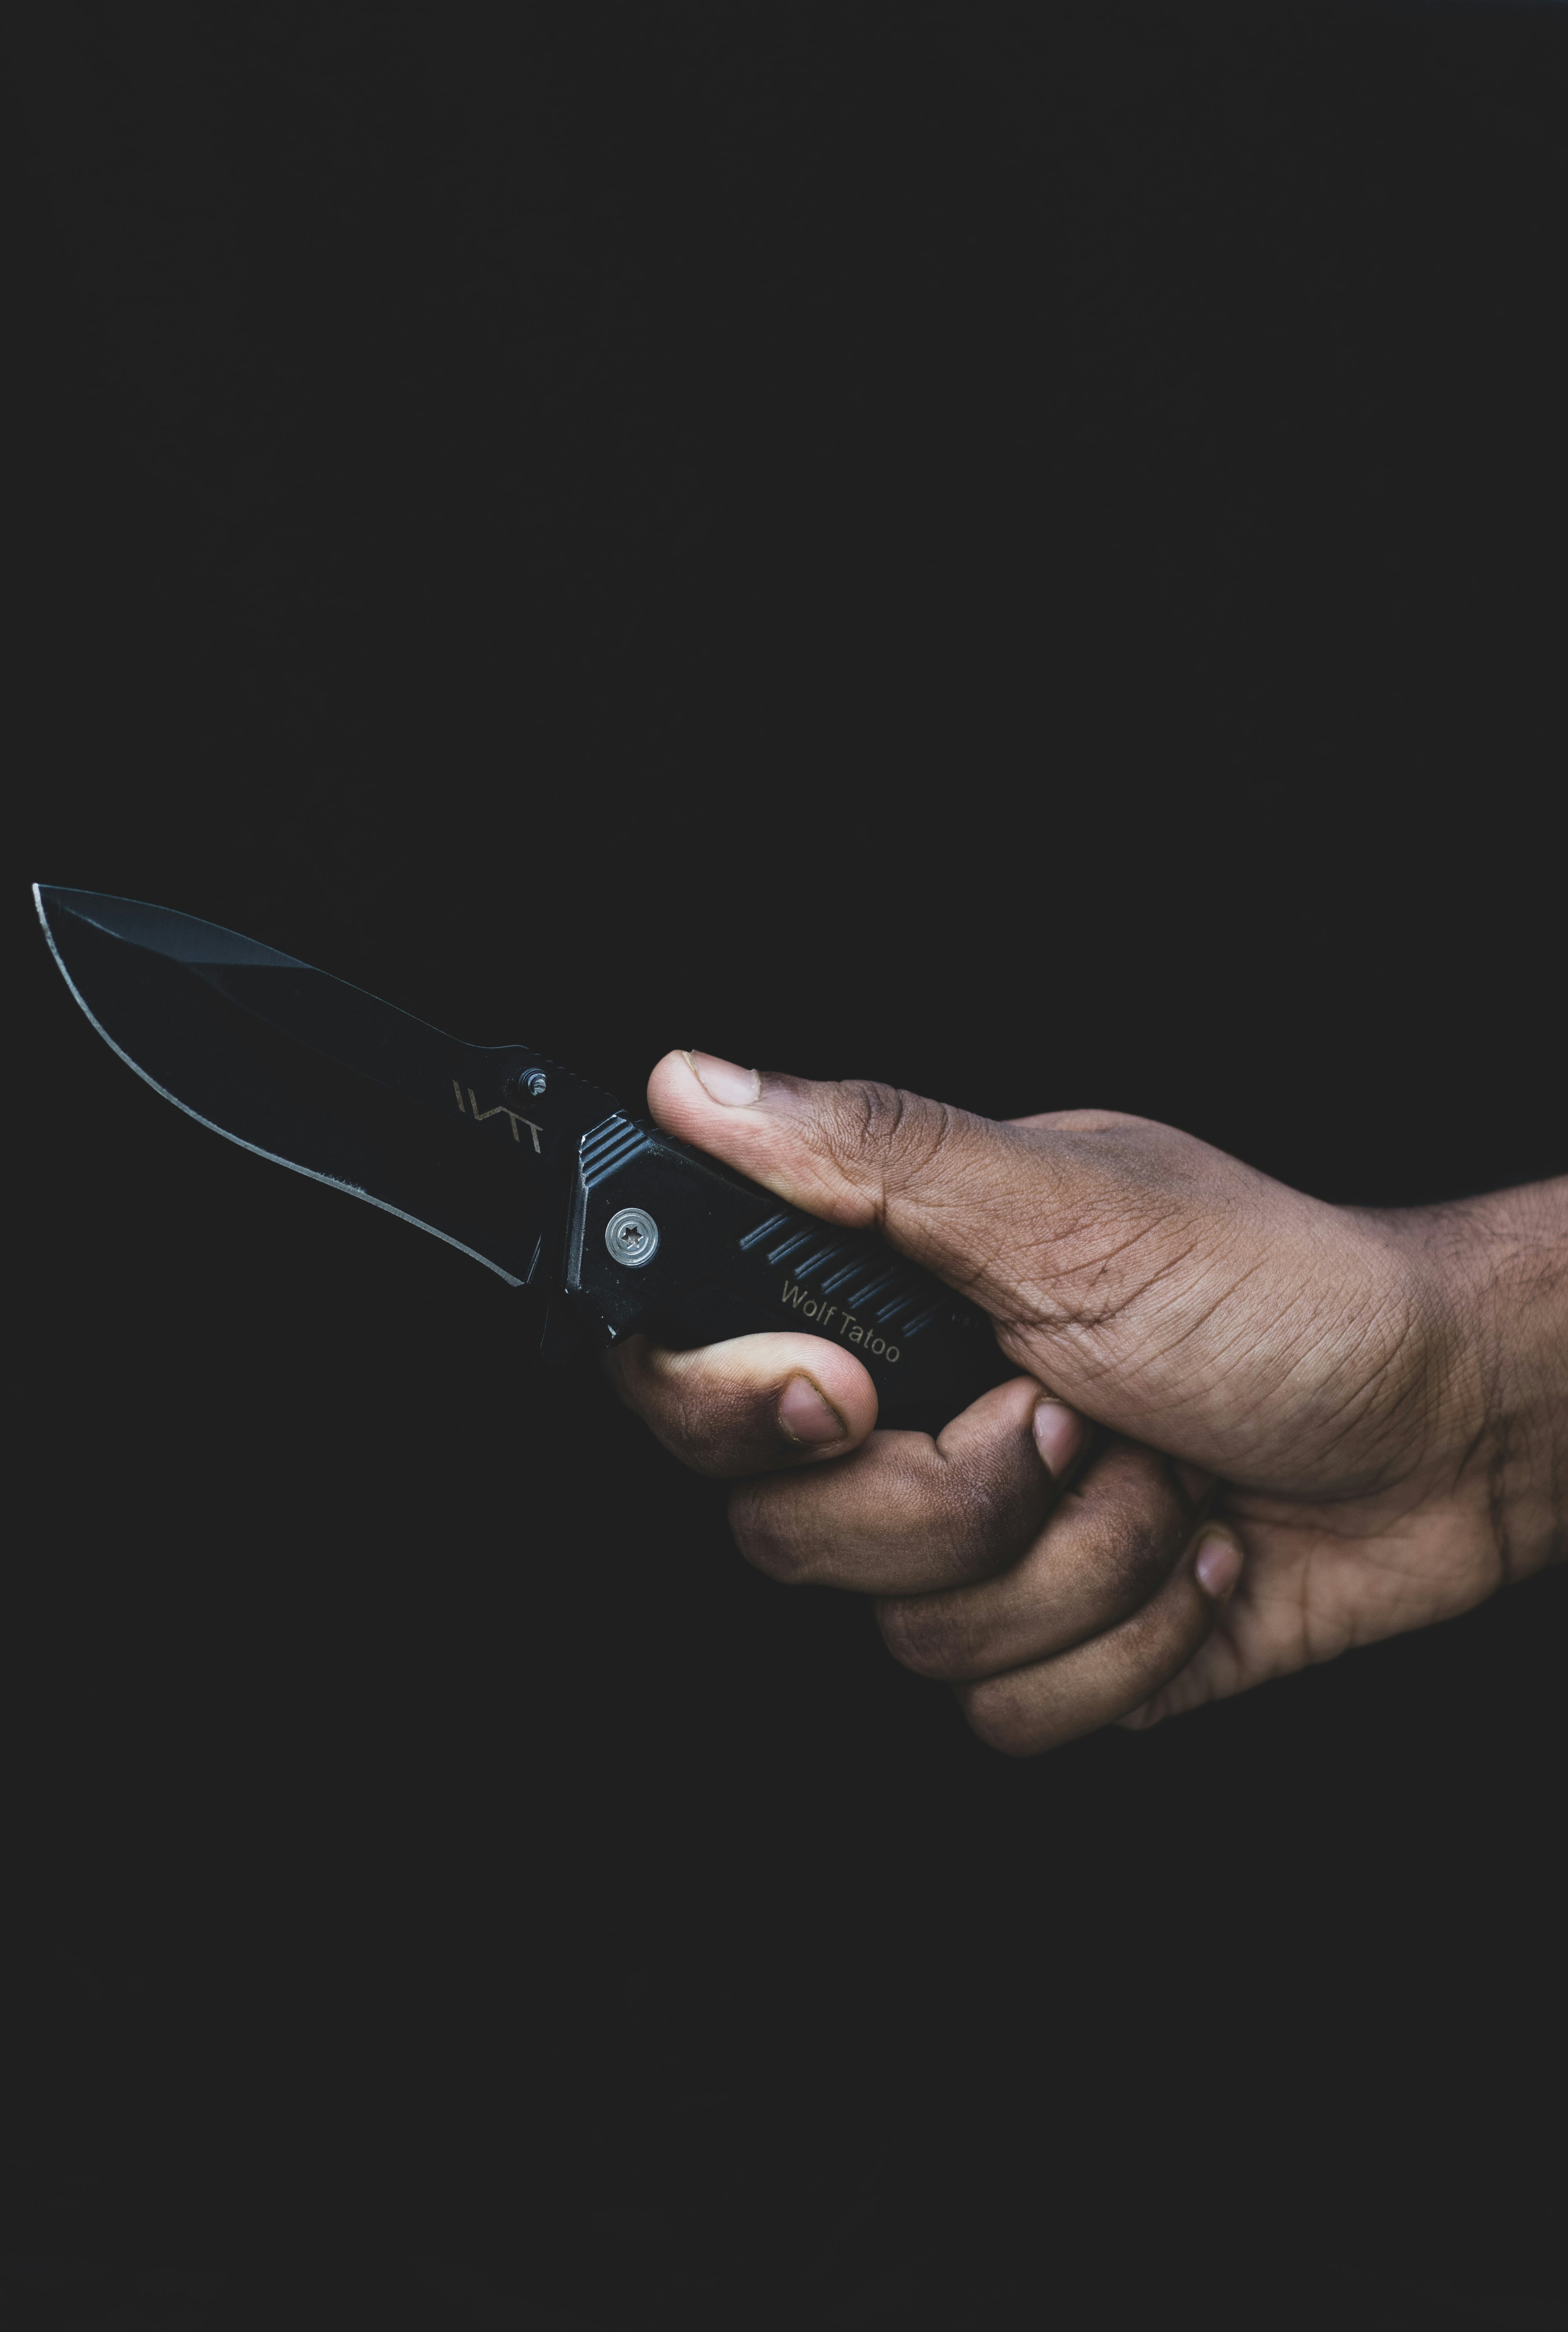 Folding military pocket knife in one hand of a boy, on a black background.